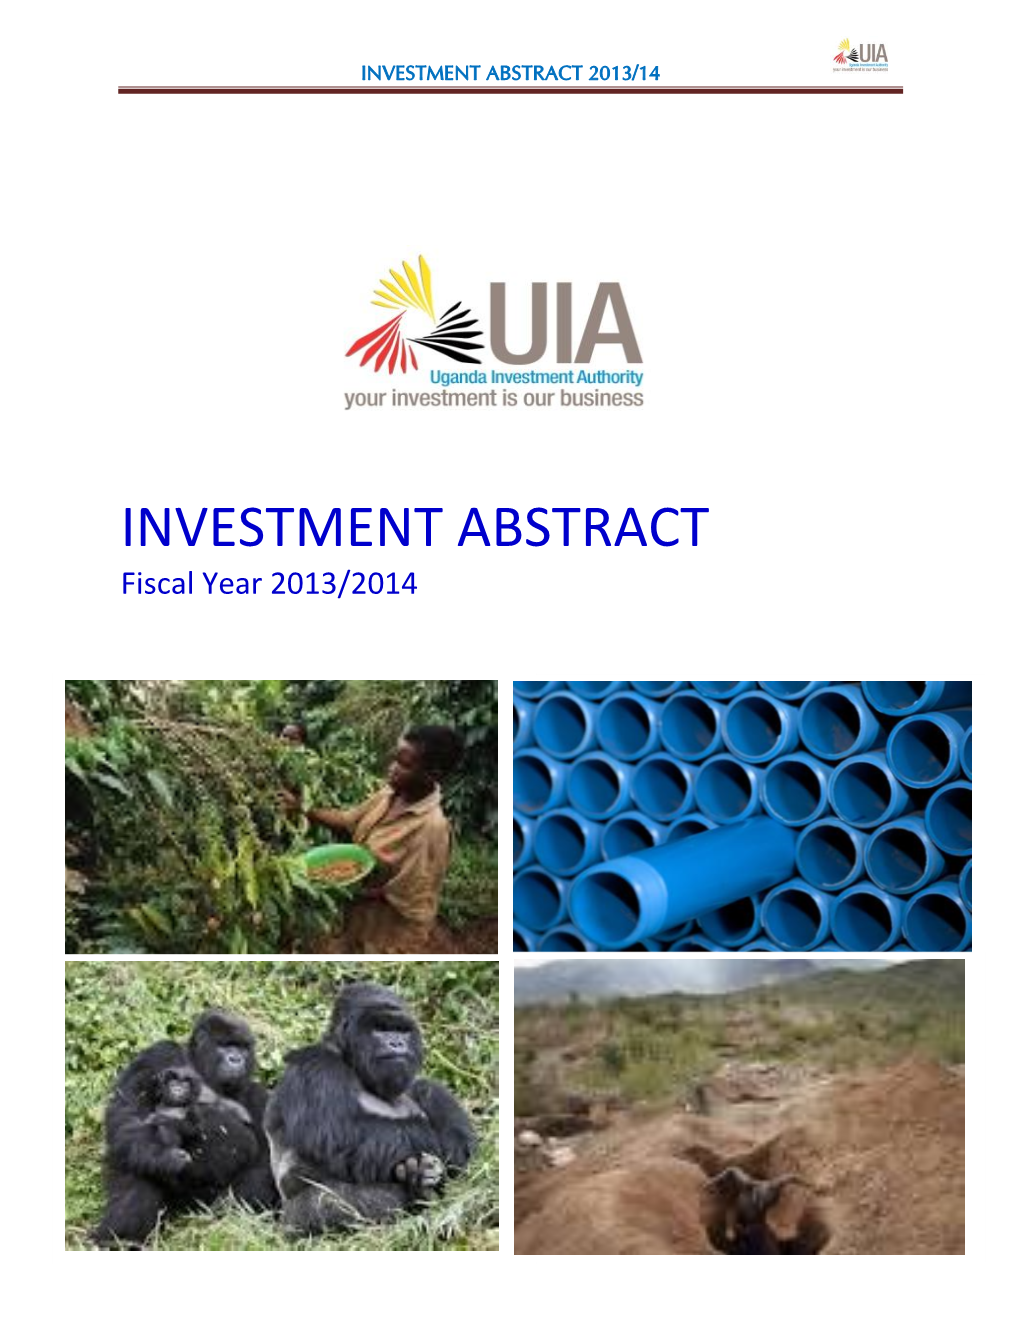 Investment Abstract 2013/14